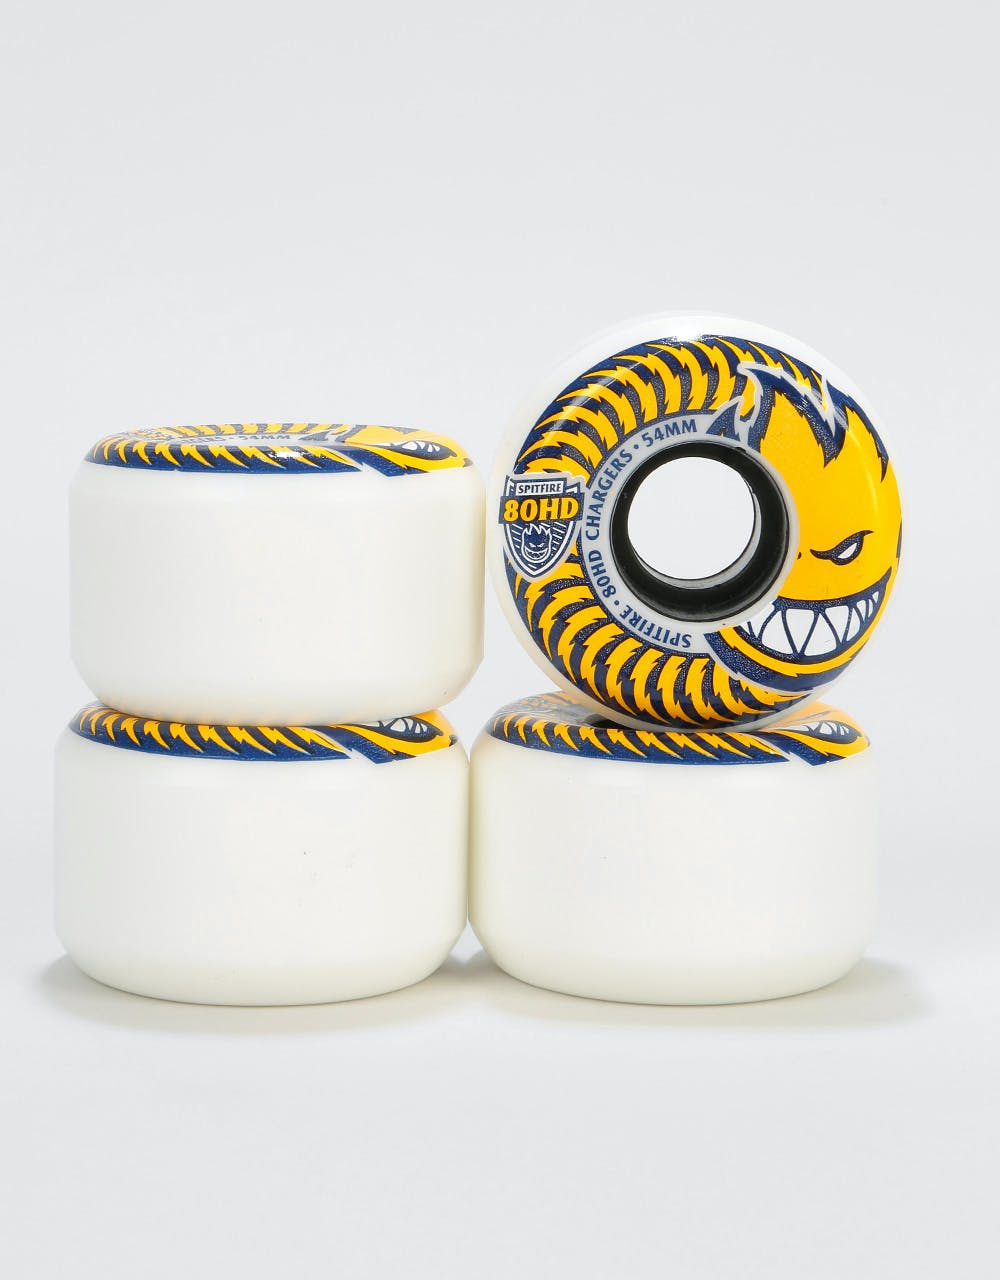 Spitfire Chargers Conical 80HD Skateboard Wheel - 54mm